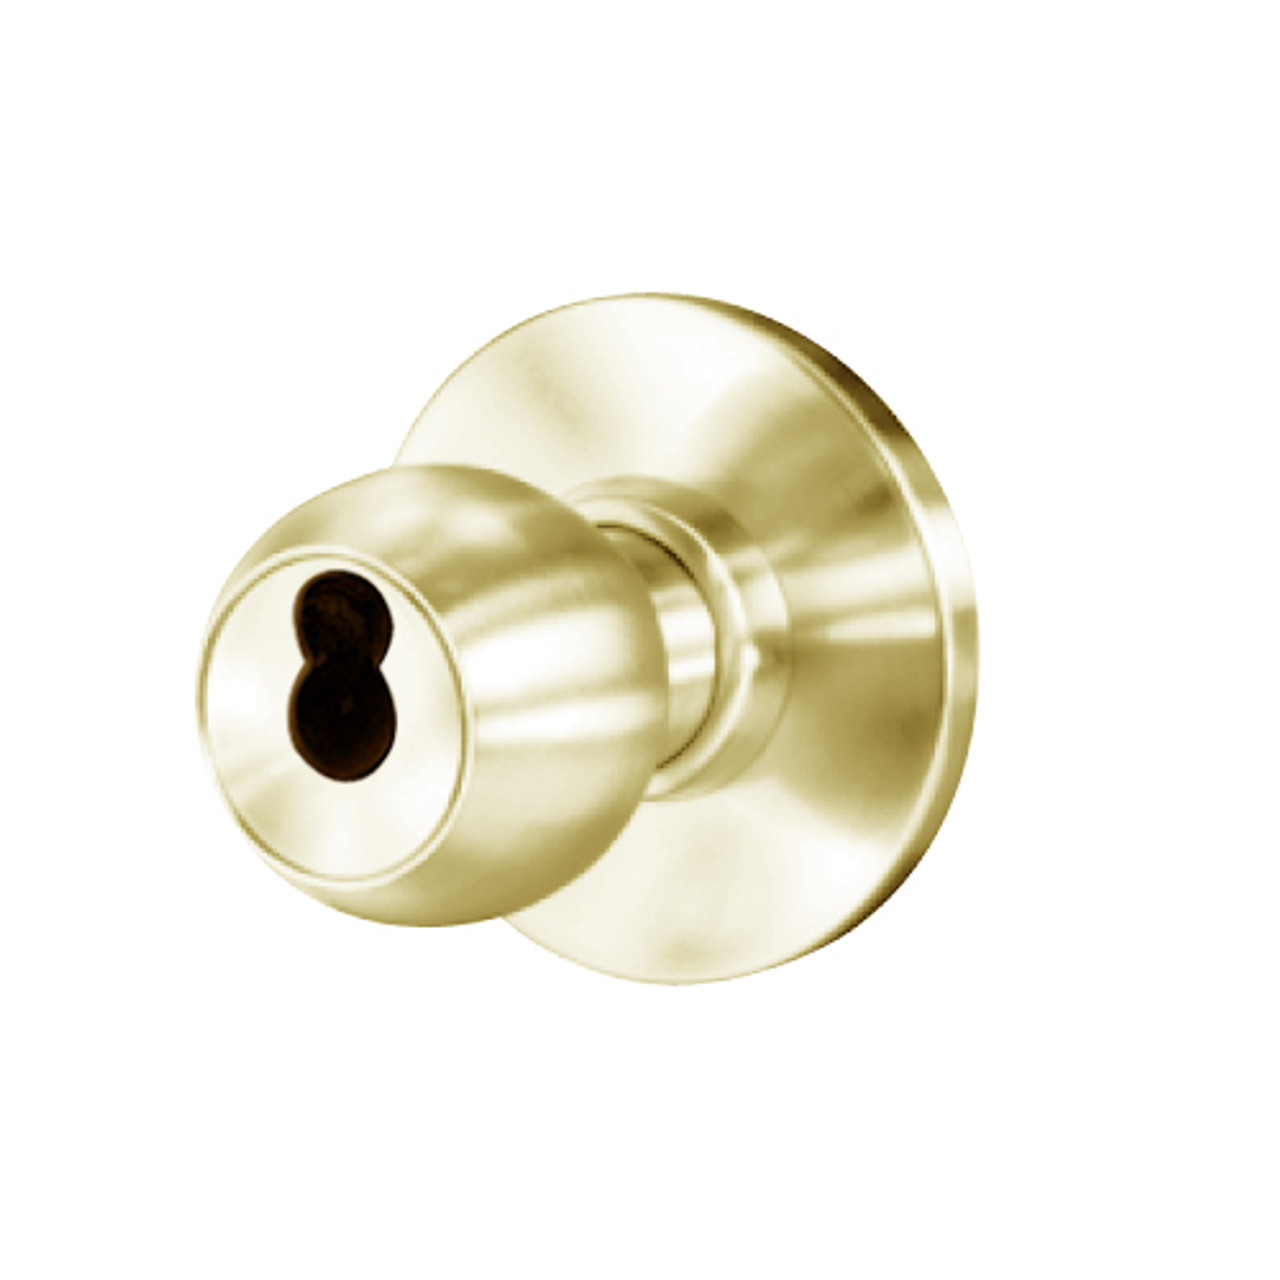 8K47YR4AS3606 Best 8K Series Exit Heavy Duty Cylindrical Knob Locks with Round Style in Satin Brass